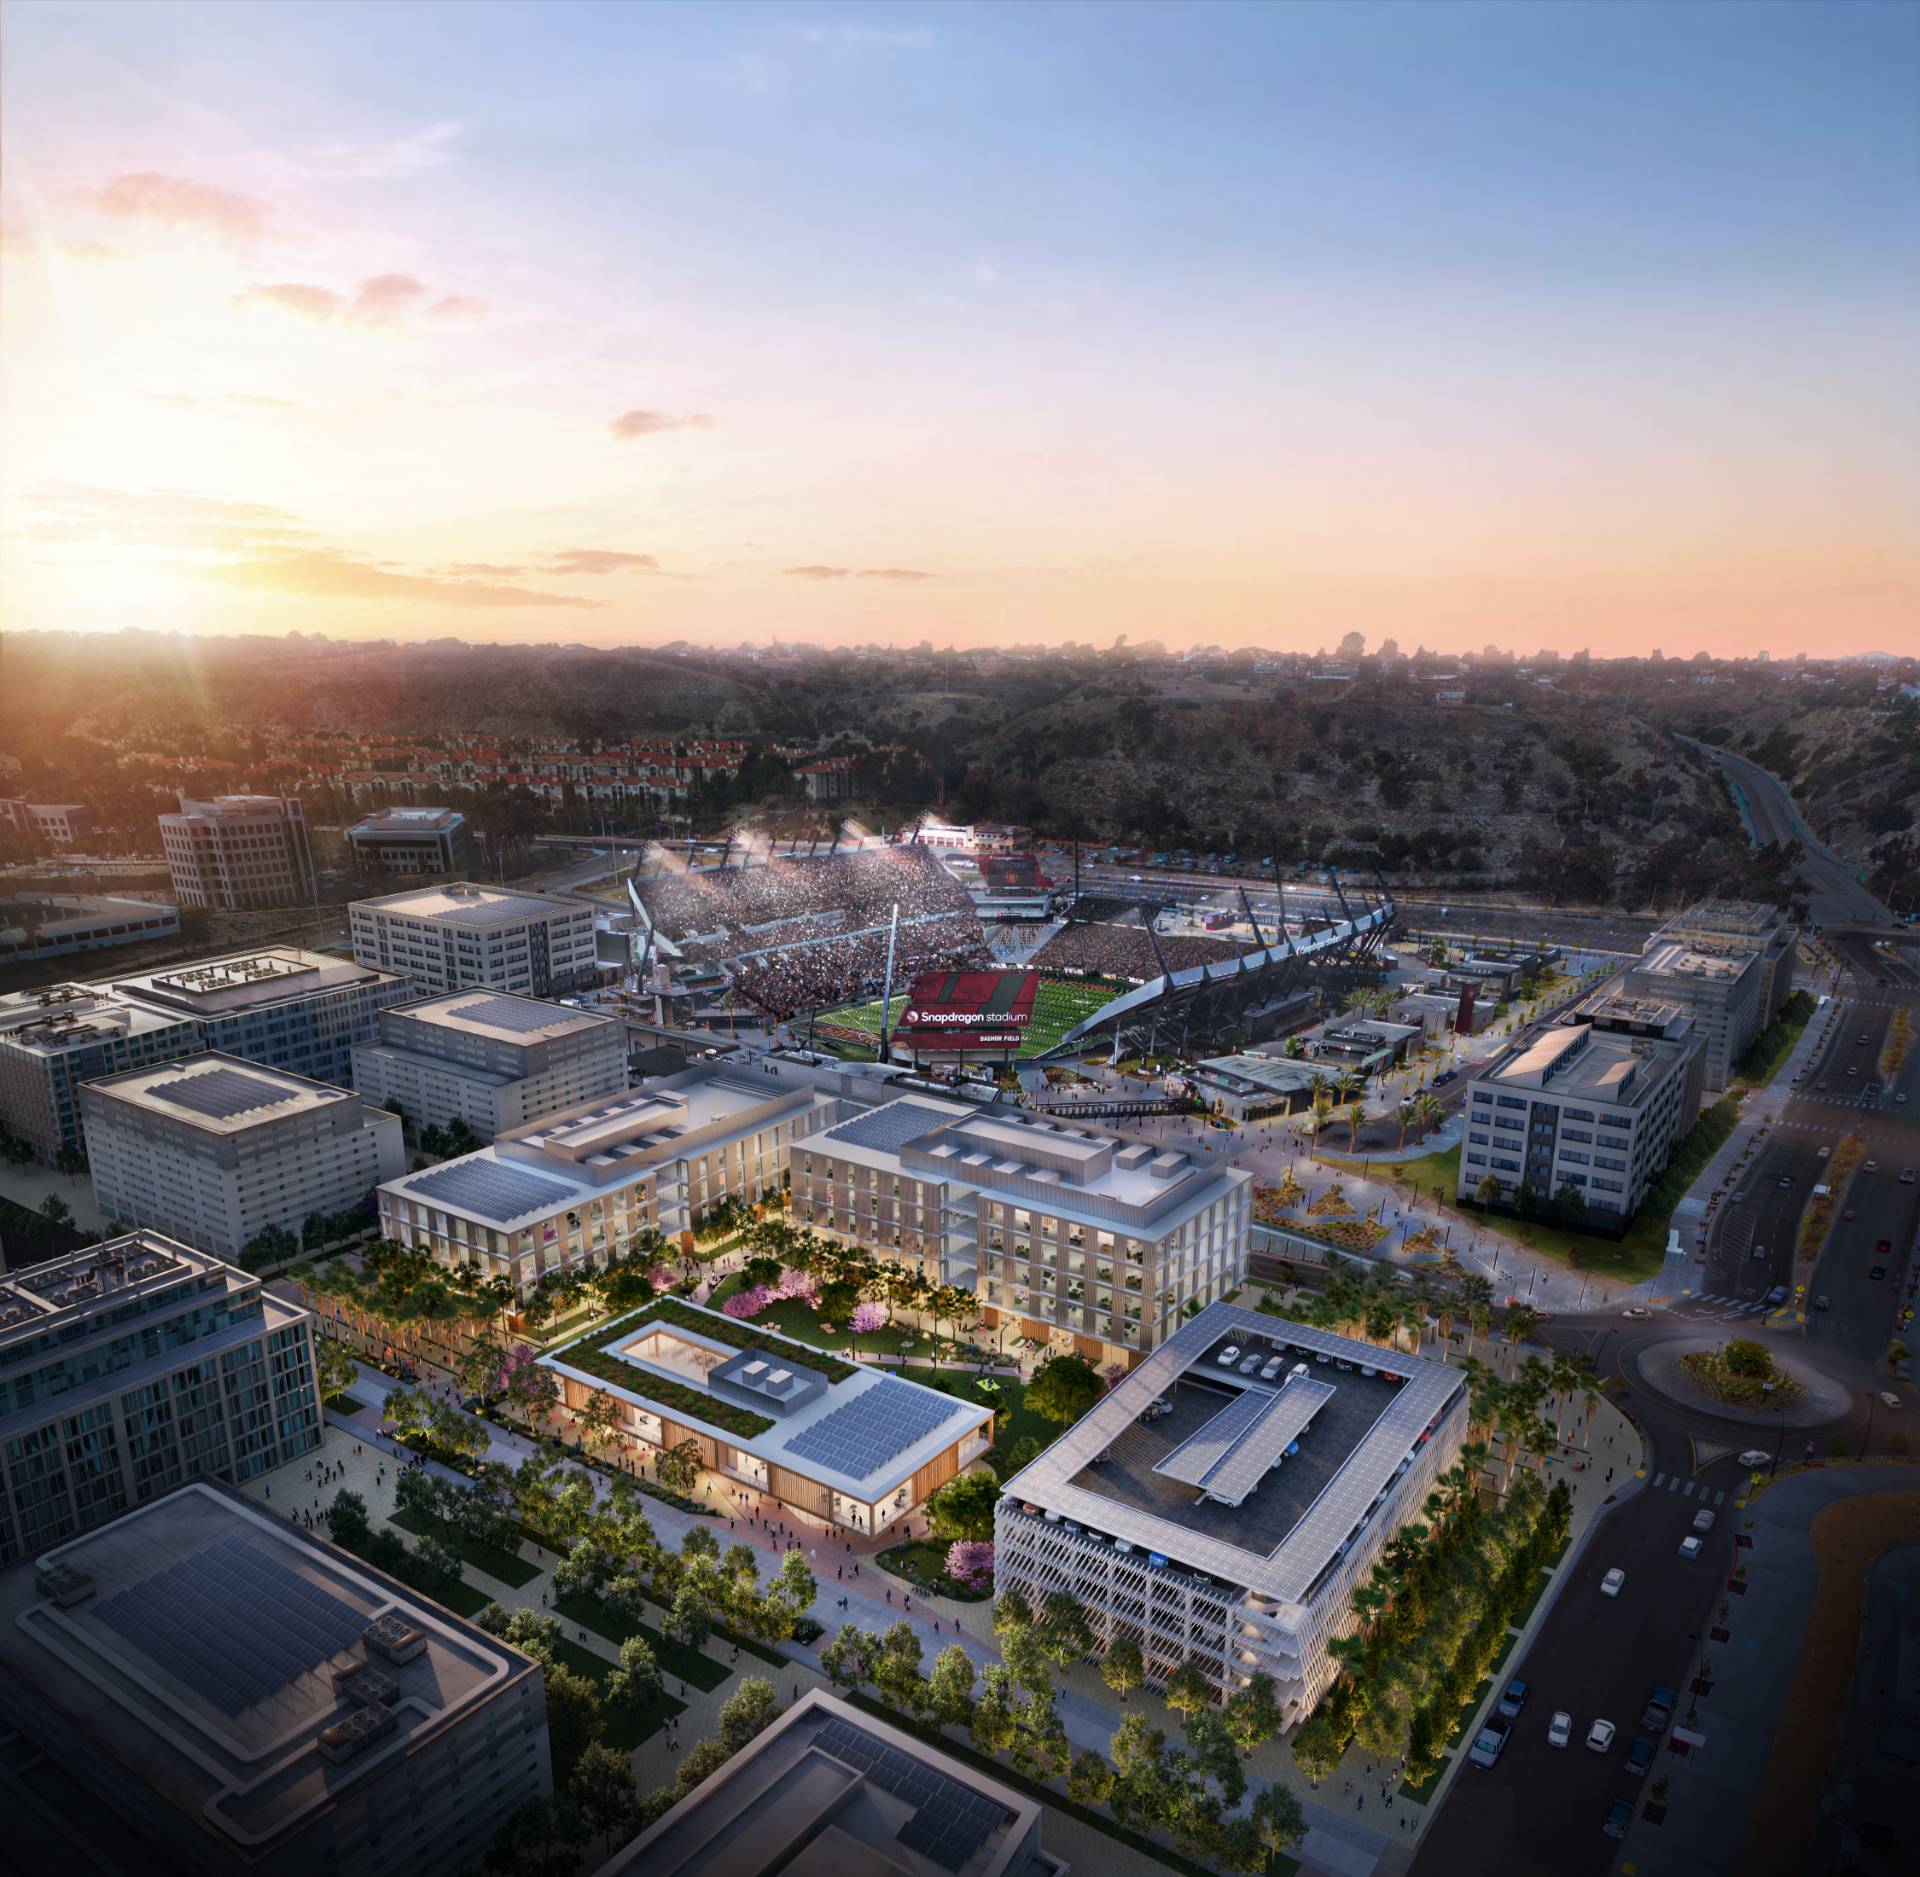 Aerial imagery of the first innovation district project